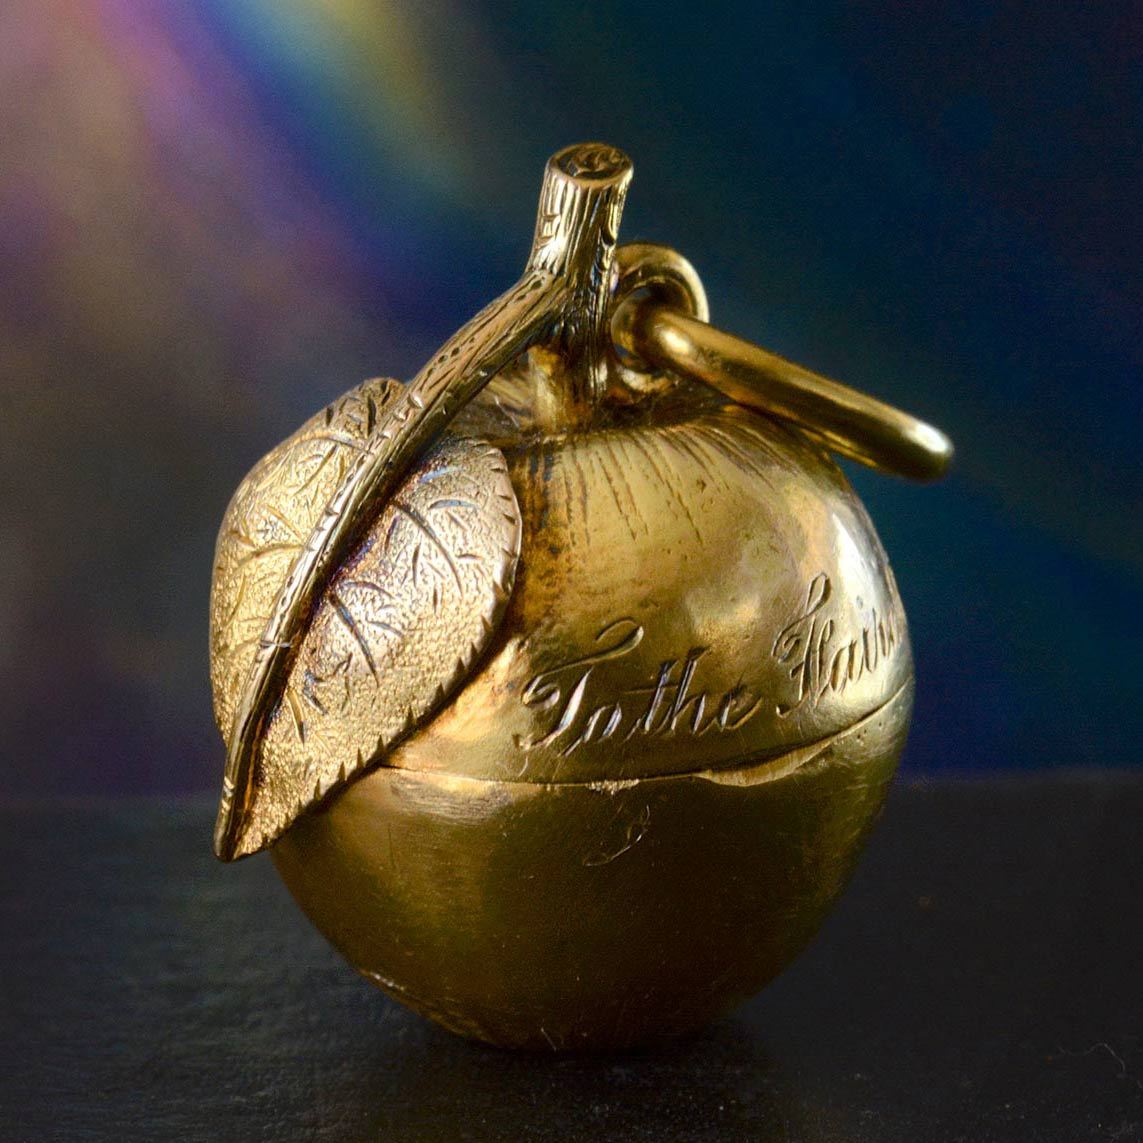 Erie Basin Blog A 19th Century Golden Apple Locket With The